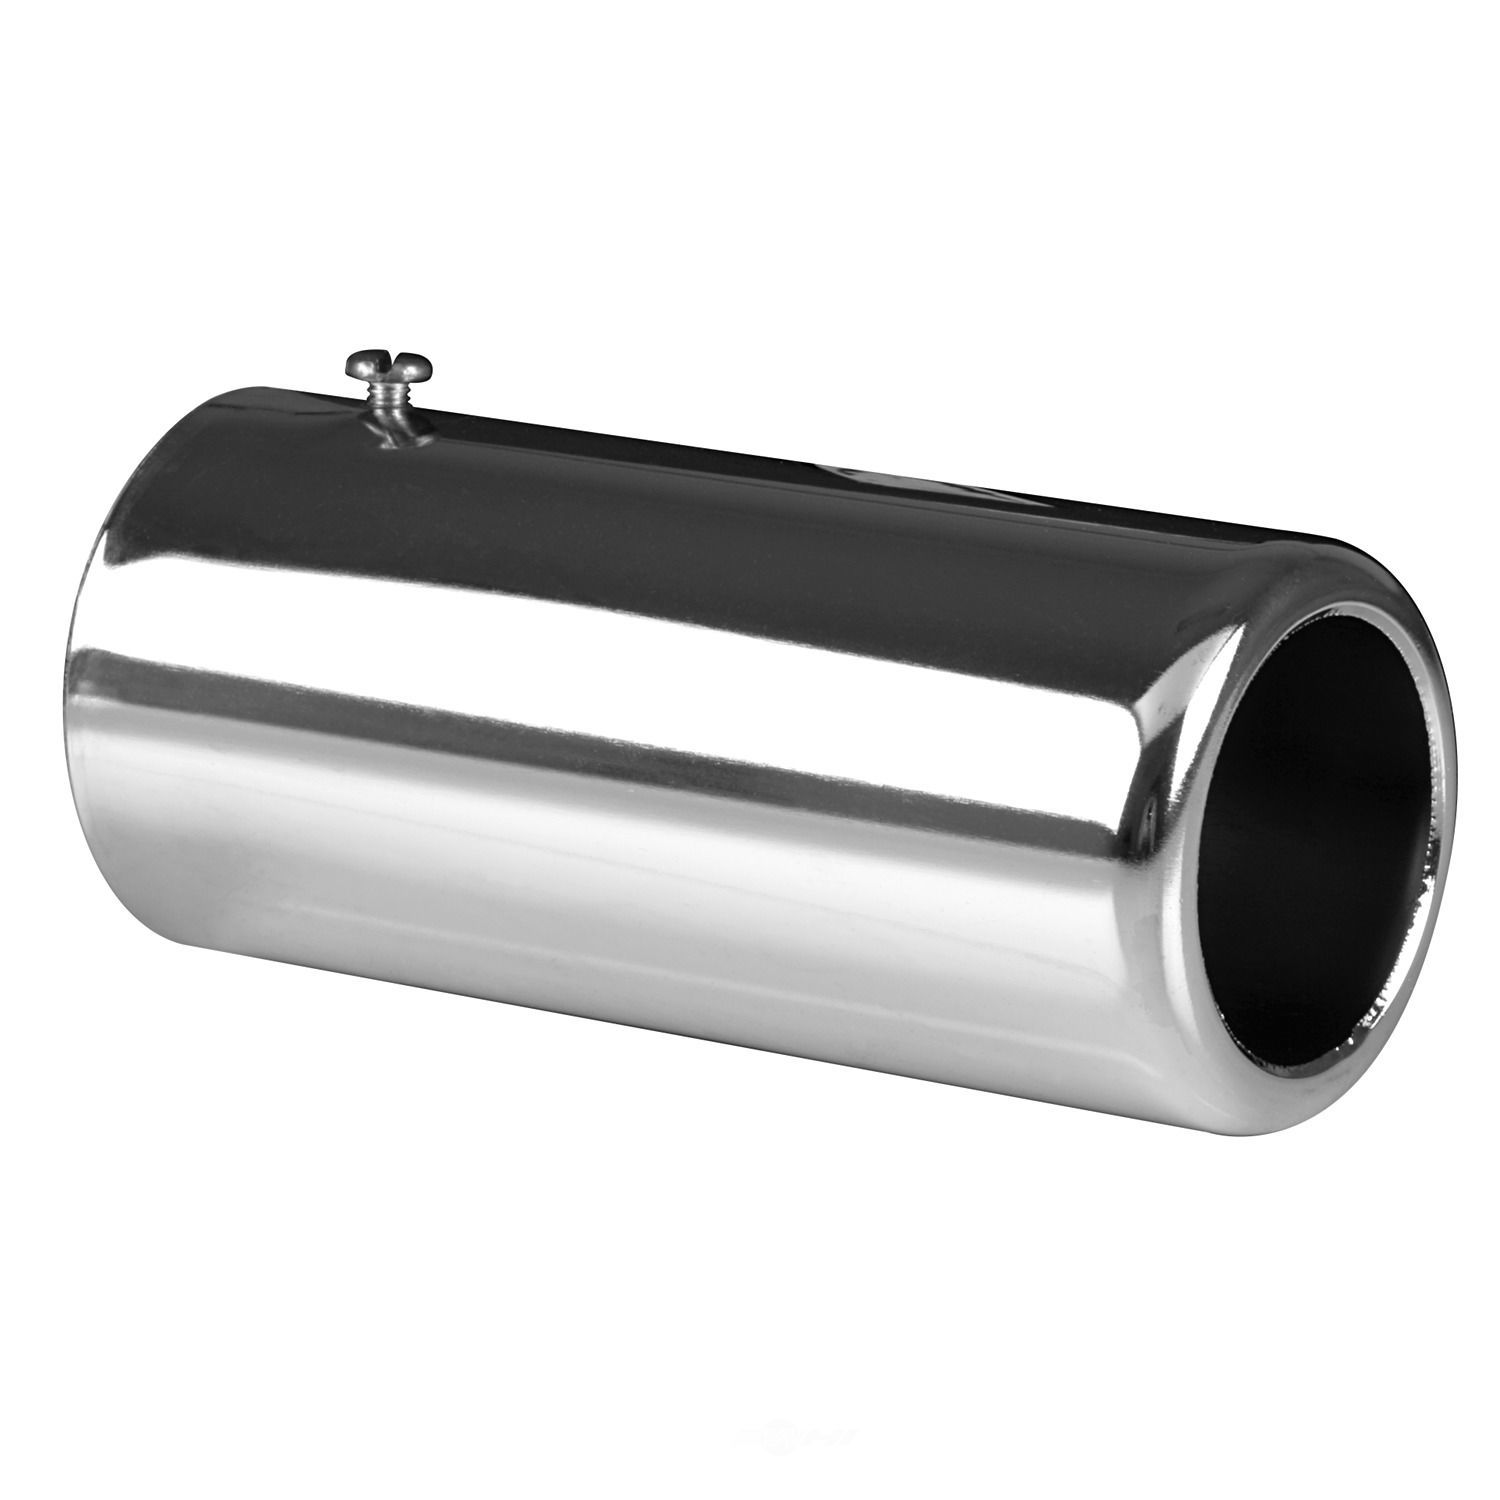 AP EXHAUST W/FEDERAL CONVERTER - Exhaust Tail Pipe Tip - APF 9820